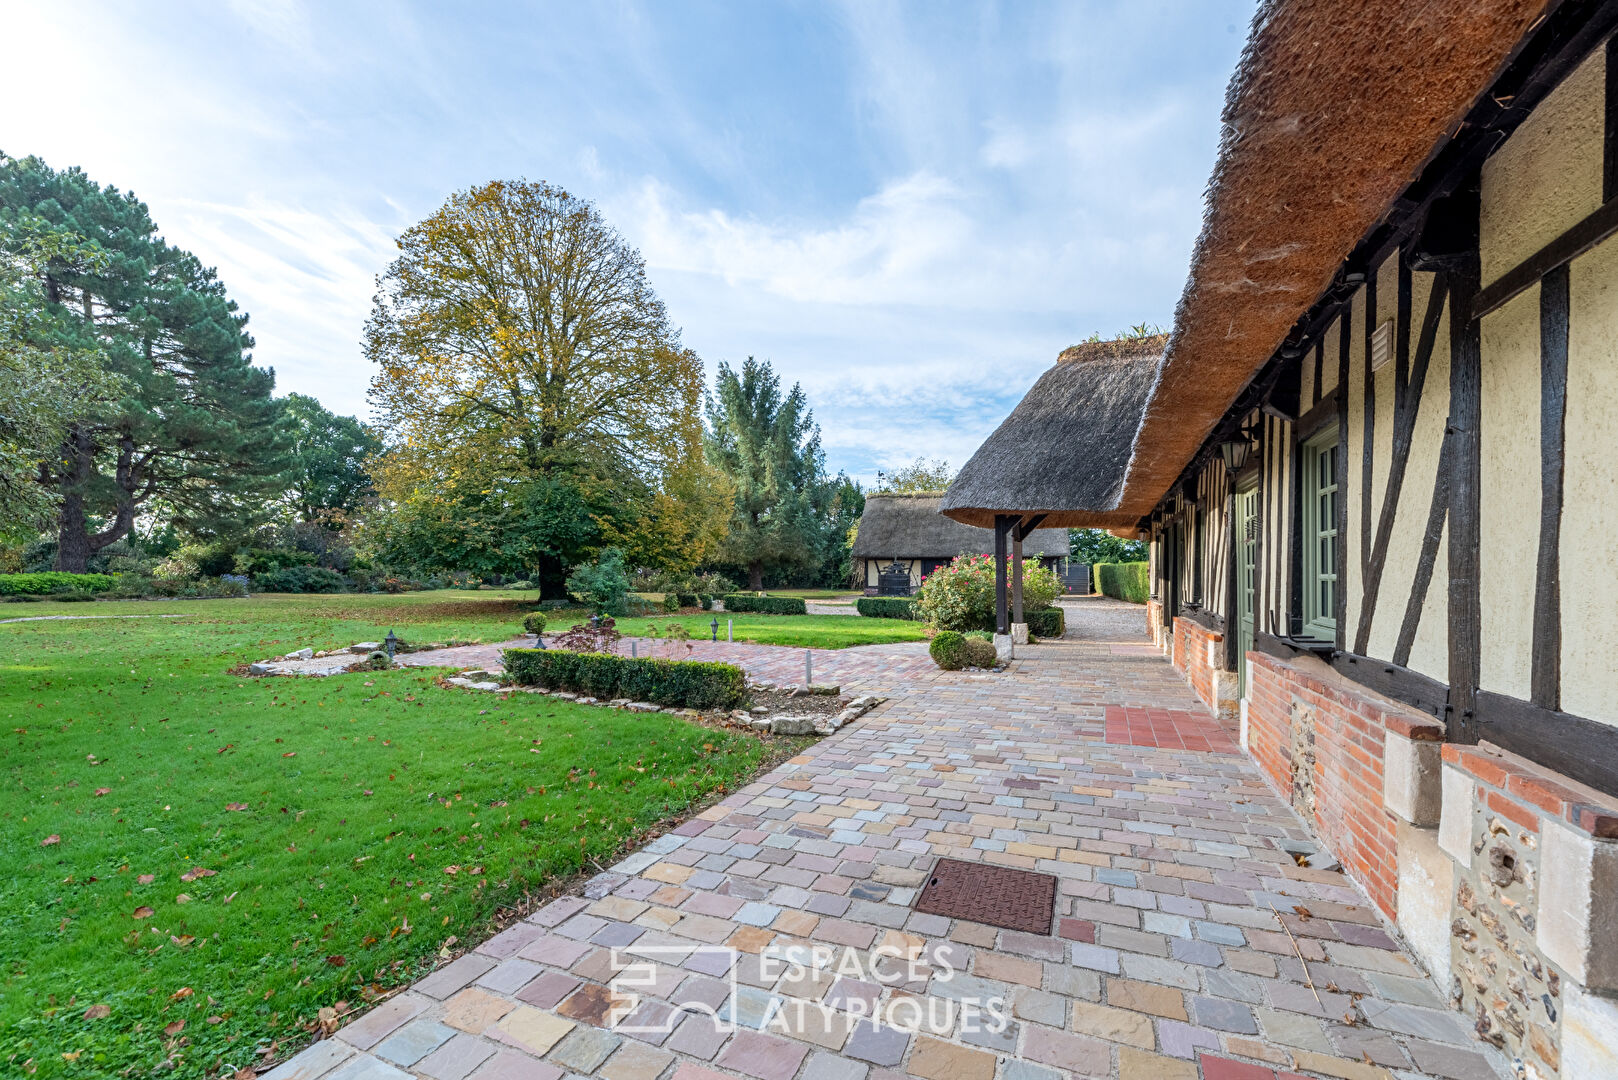 Charming thatched cottage with landscaped garden and outbuilding